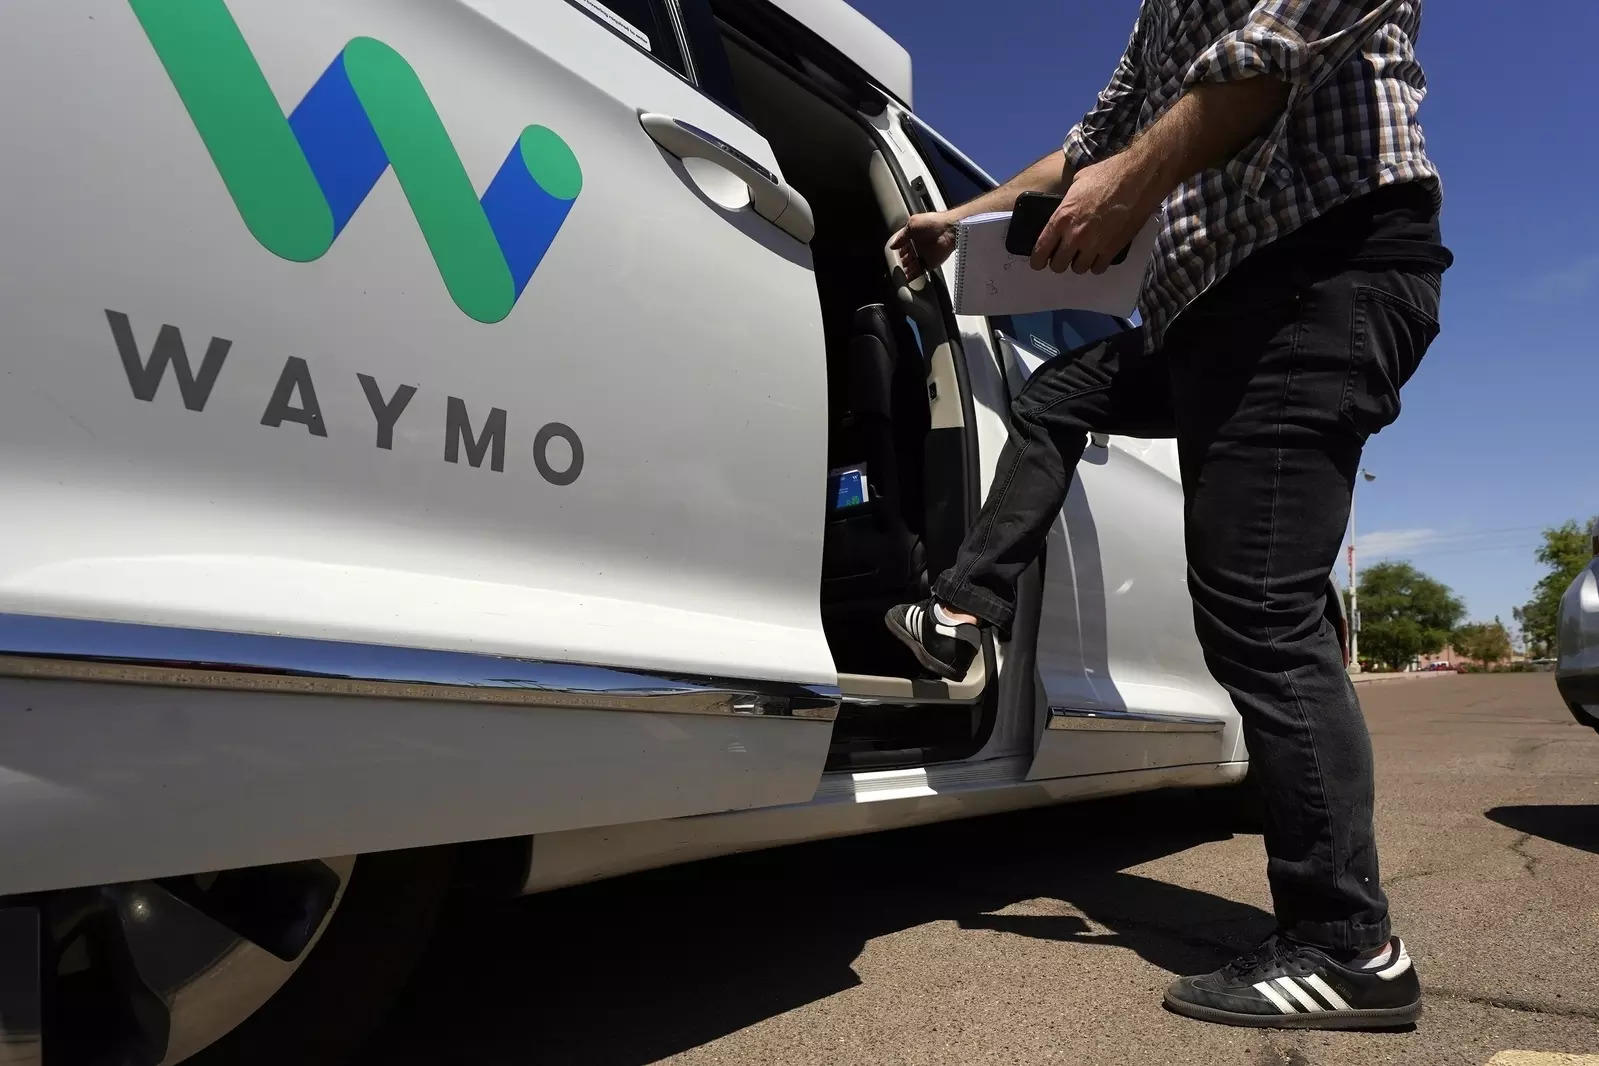  Waymo in August started giving autonomous rides free of charge to a limited number of people in San Francisco with safety drivers on board, using its Jaguar electric vehicles equipped with sensors such as spinning lidars on the top.